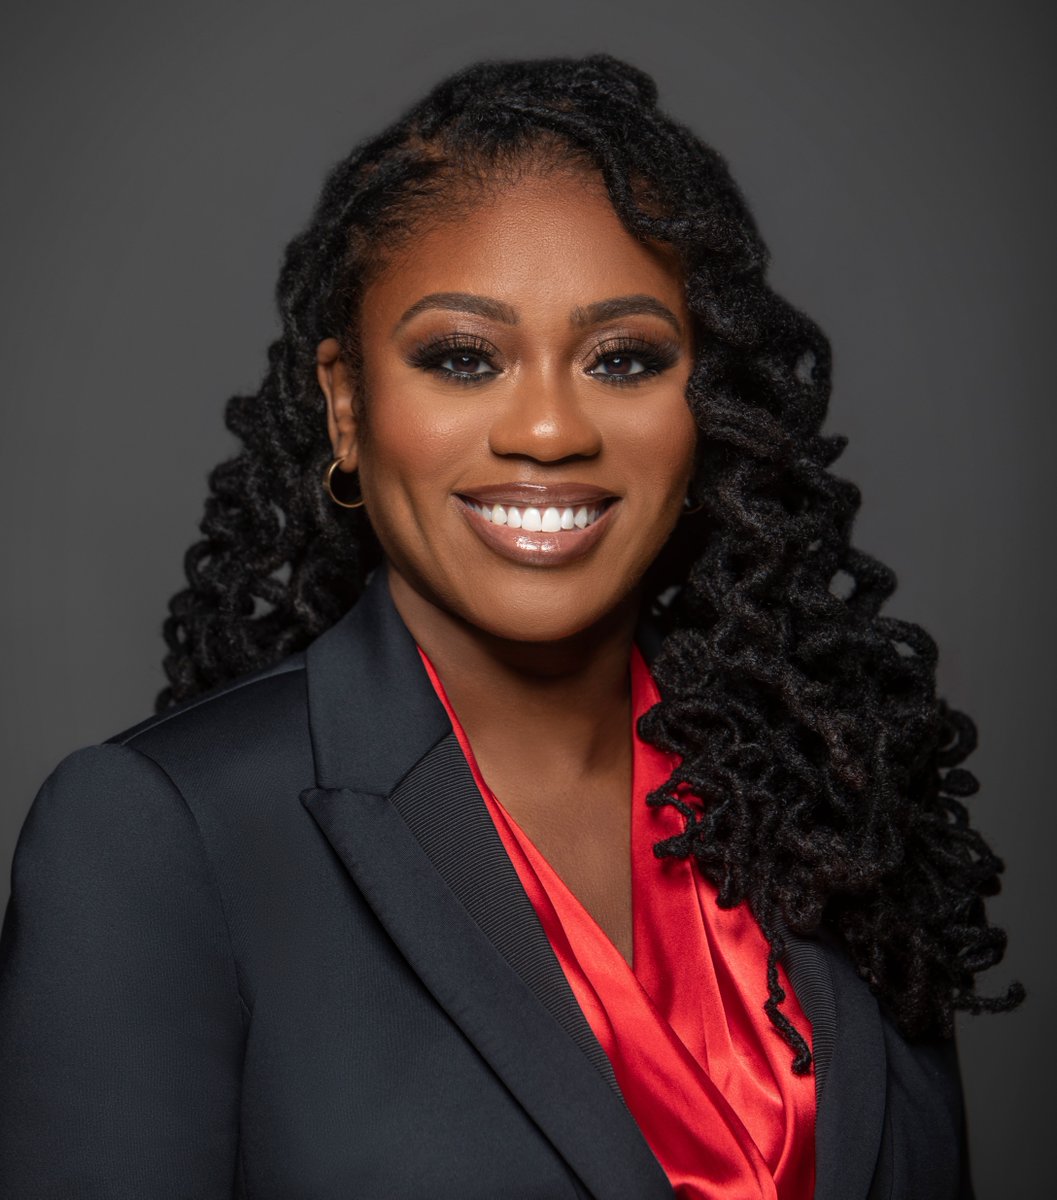 Meet Dr. Lattisha Bilbrew, B.S. ’07, a @univmiami alumna who is making strides as one of only five Black female orthopedic surgeons in the state of Georgia. 🙌 Learn more at bit.ly/48NgrGs #WomensHistoryMonth #CaneForLife